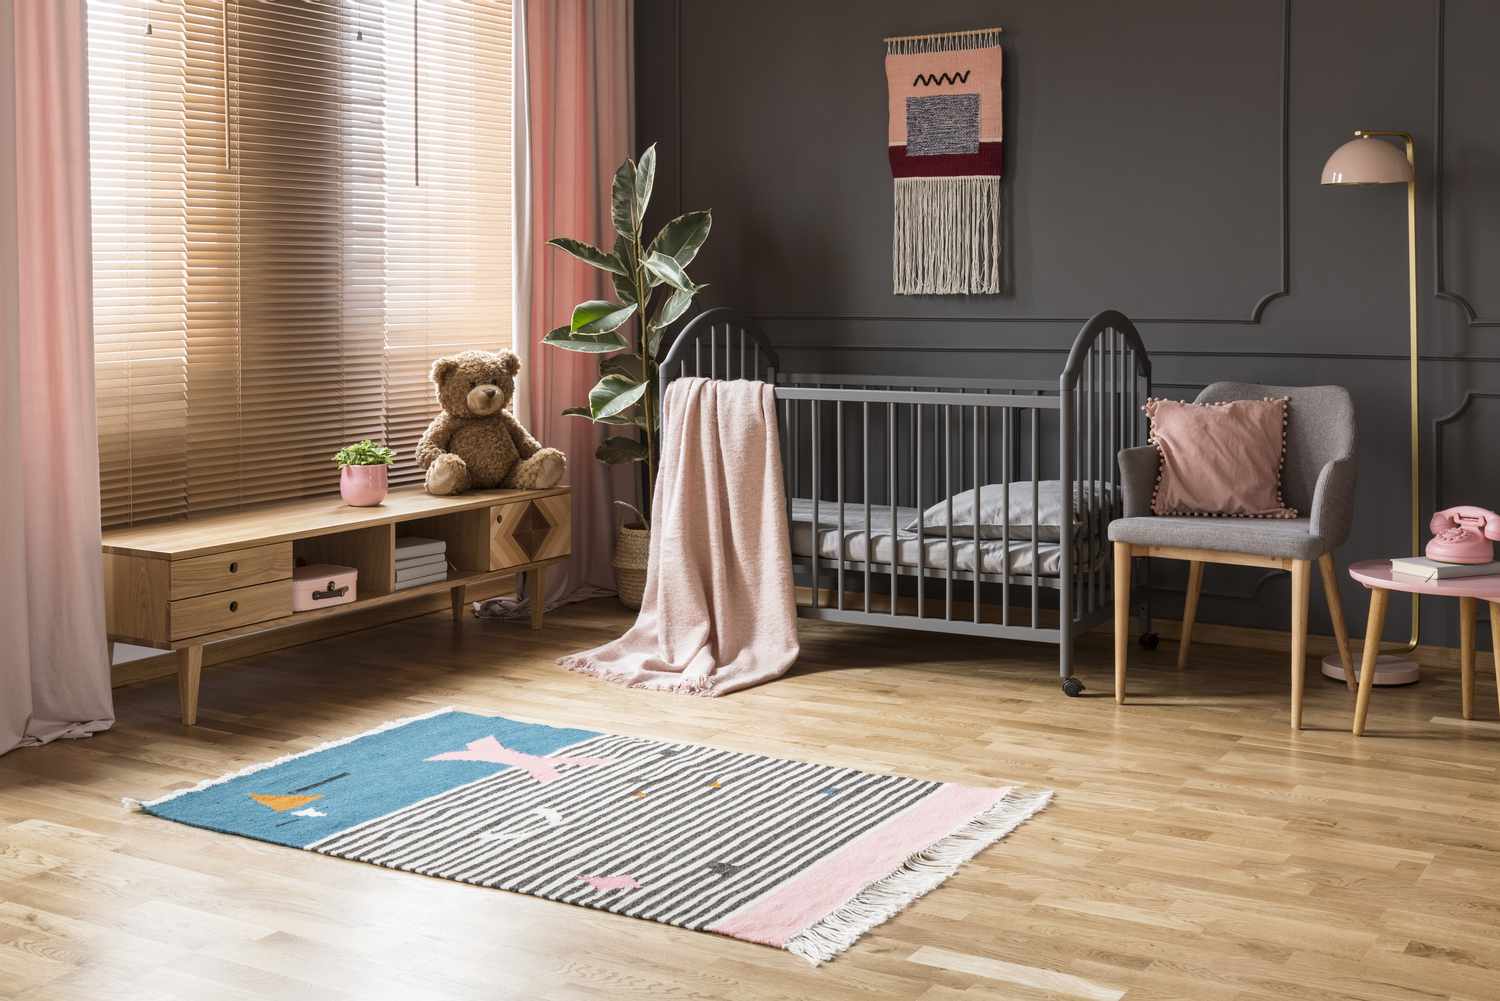 What Is The Best Color For A Nursery? Design Experts And Sleep Psychologists Advise